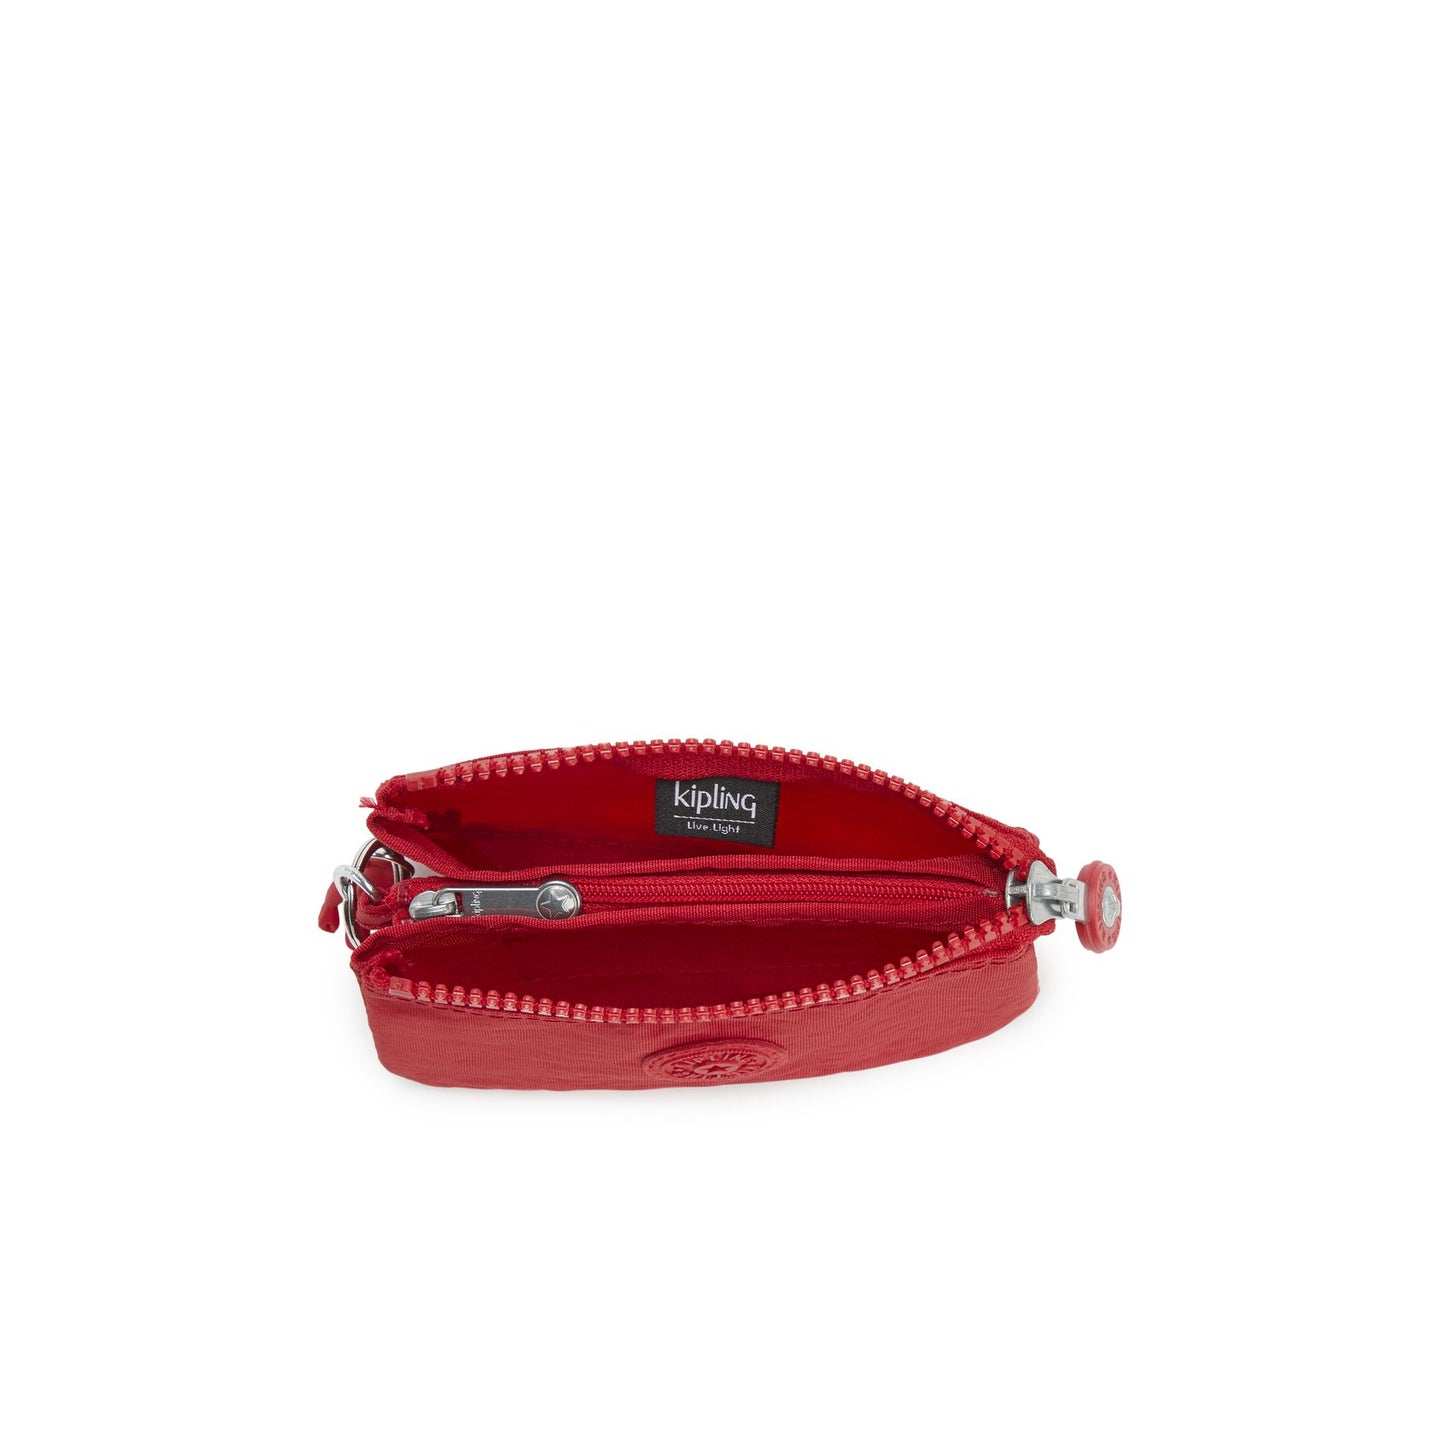 Kipling Creativity S Small Purse in Red Rouge